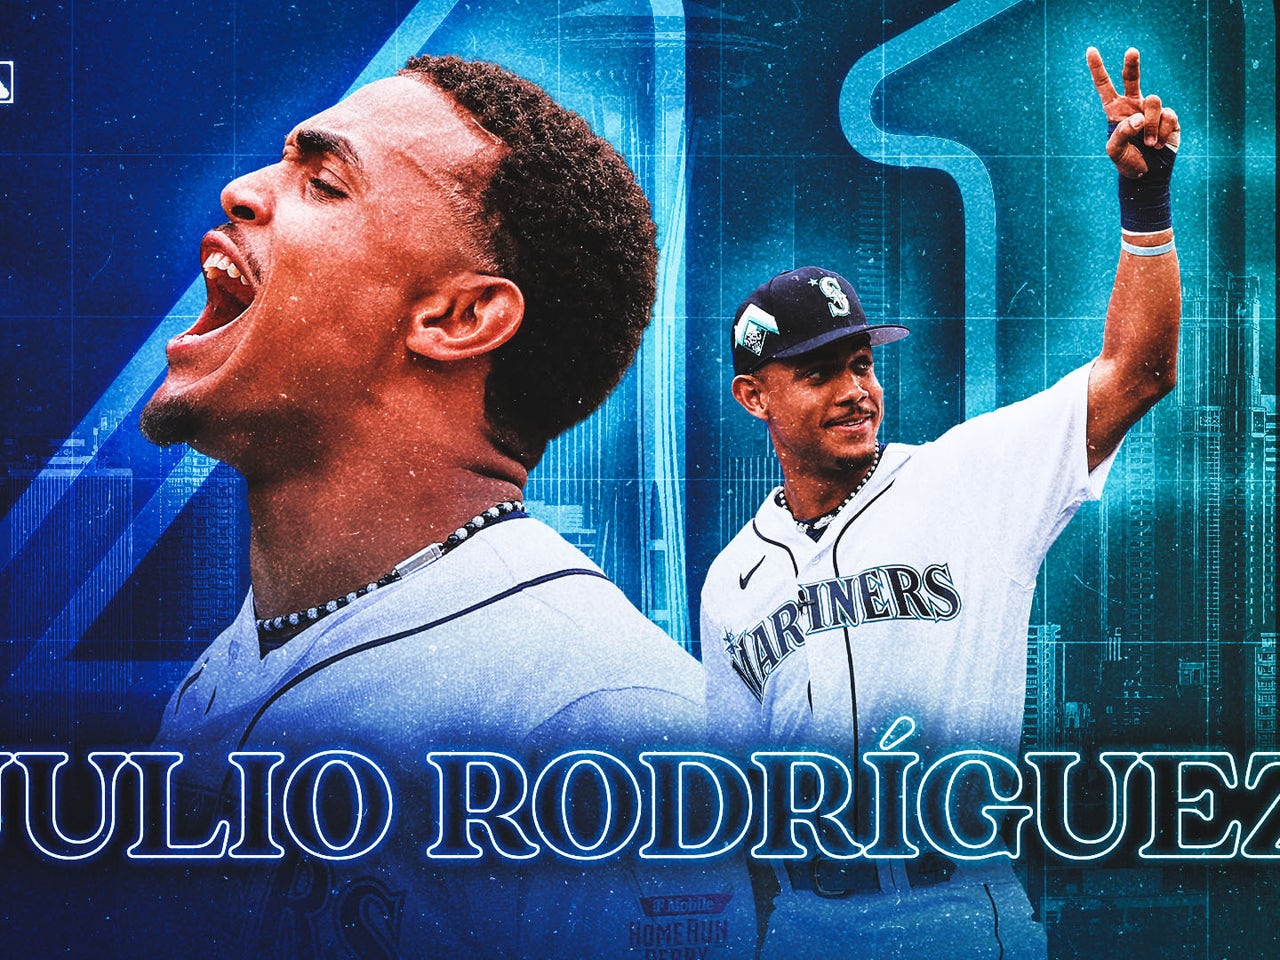 Julio Rodriguez's inside-the-park homer was years in the making for Mariners